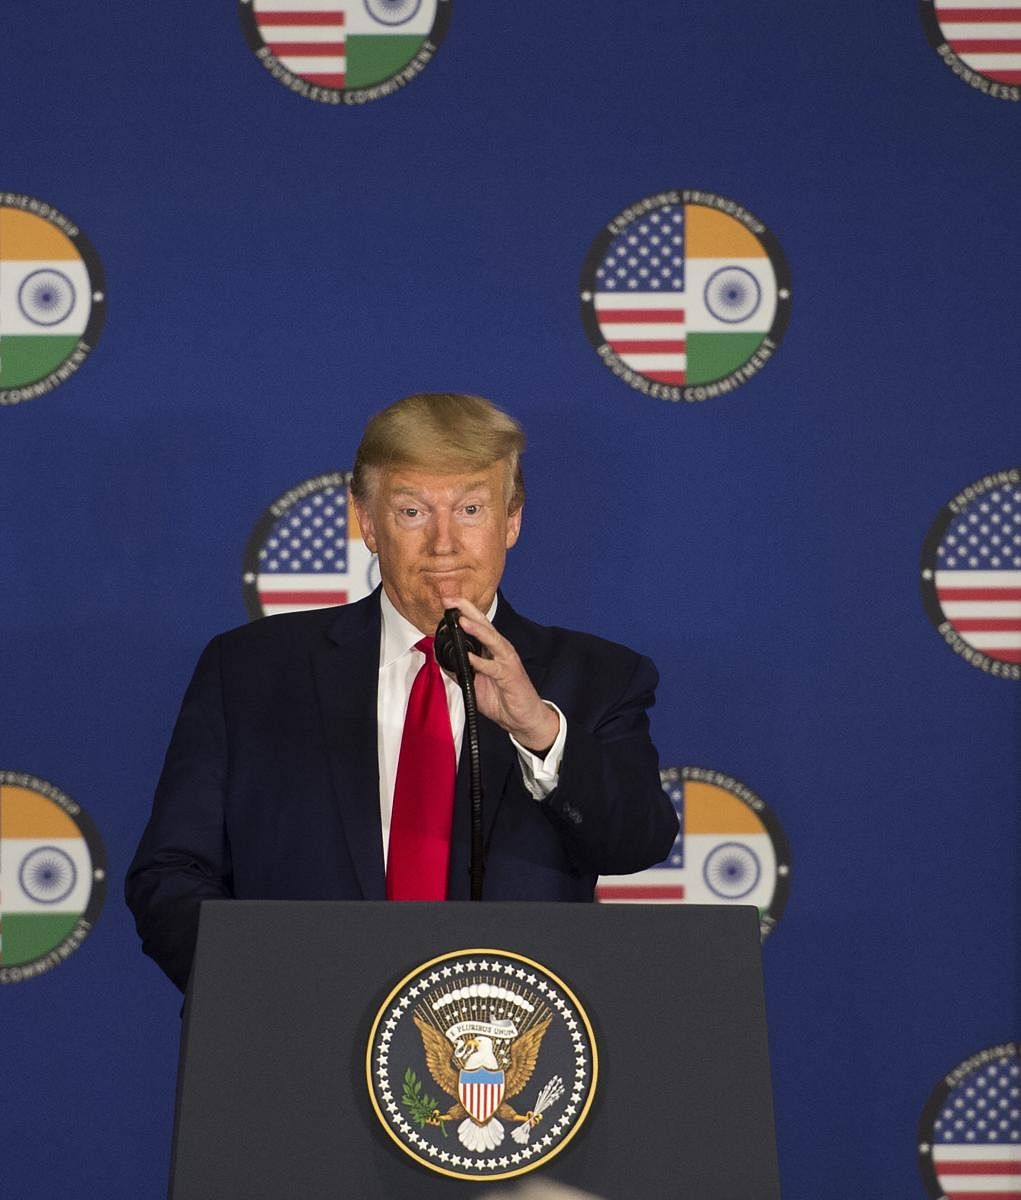 “I think you have to pay the highest tariff when you deal with India. We are being charged large amounts. They cannot do that,” US President Donald Trump said on trade relations with India. (PTI Photo)